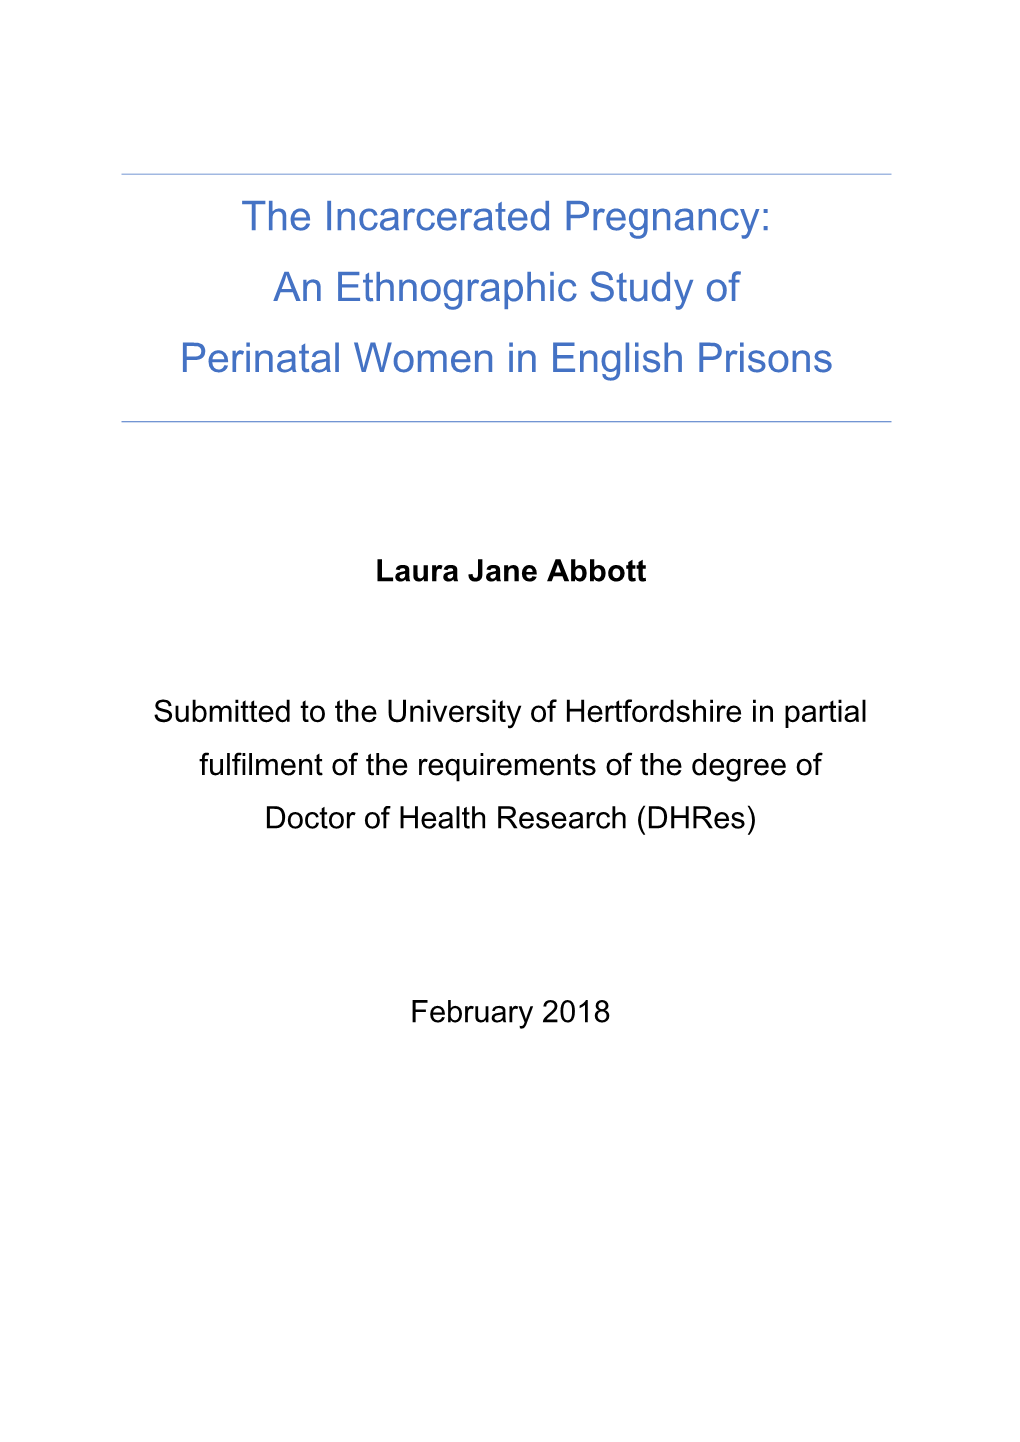 The Incarcerated Pregnancy: an Ethnographic Study of Perinatal Women in English Prisons